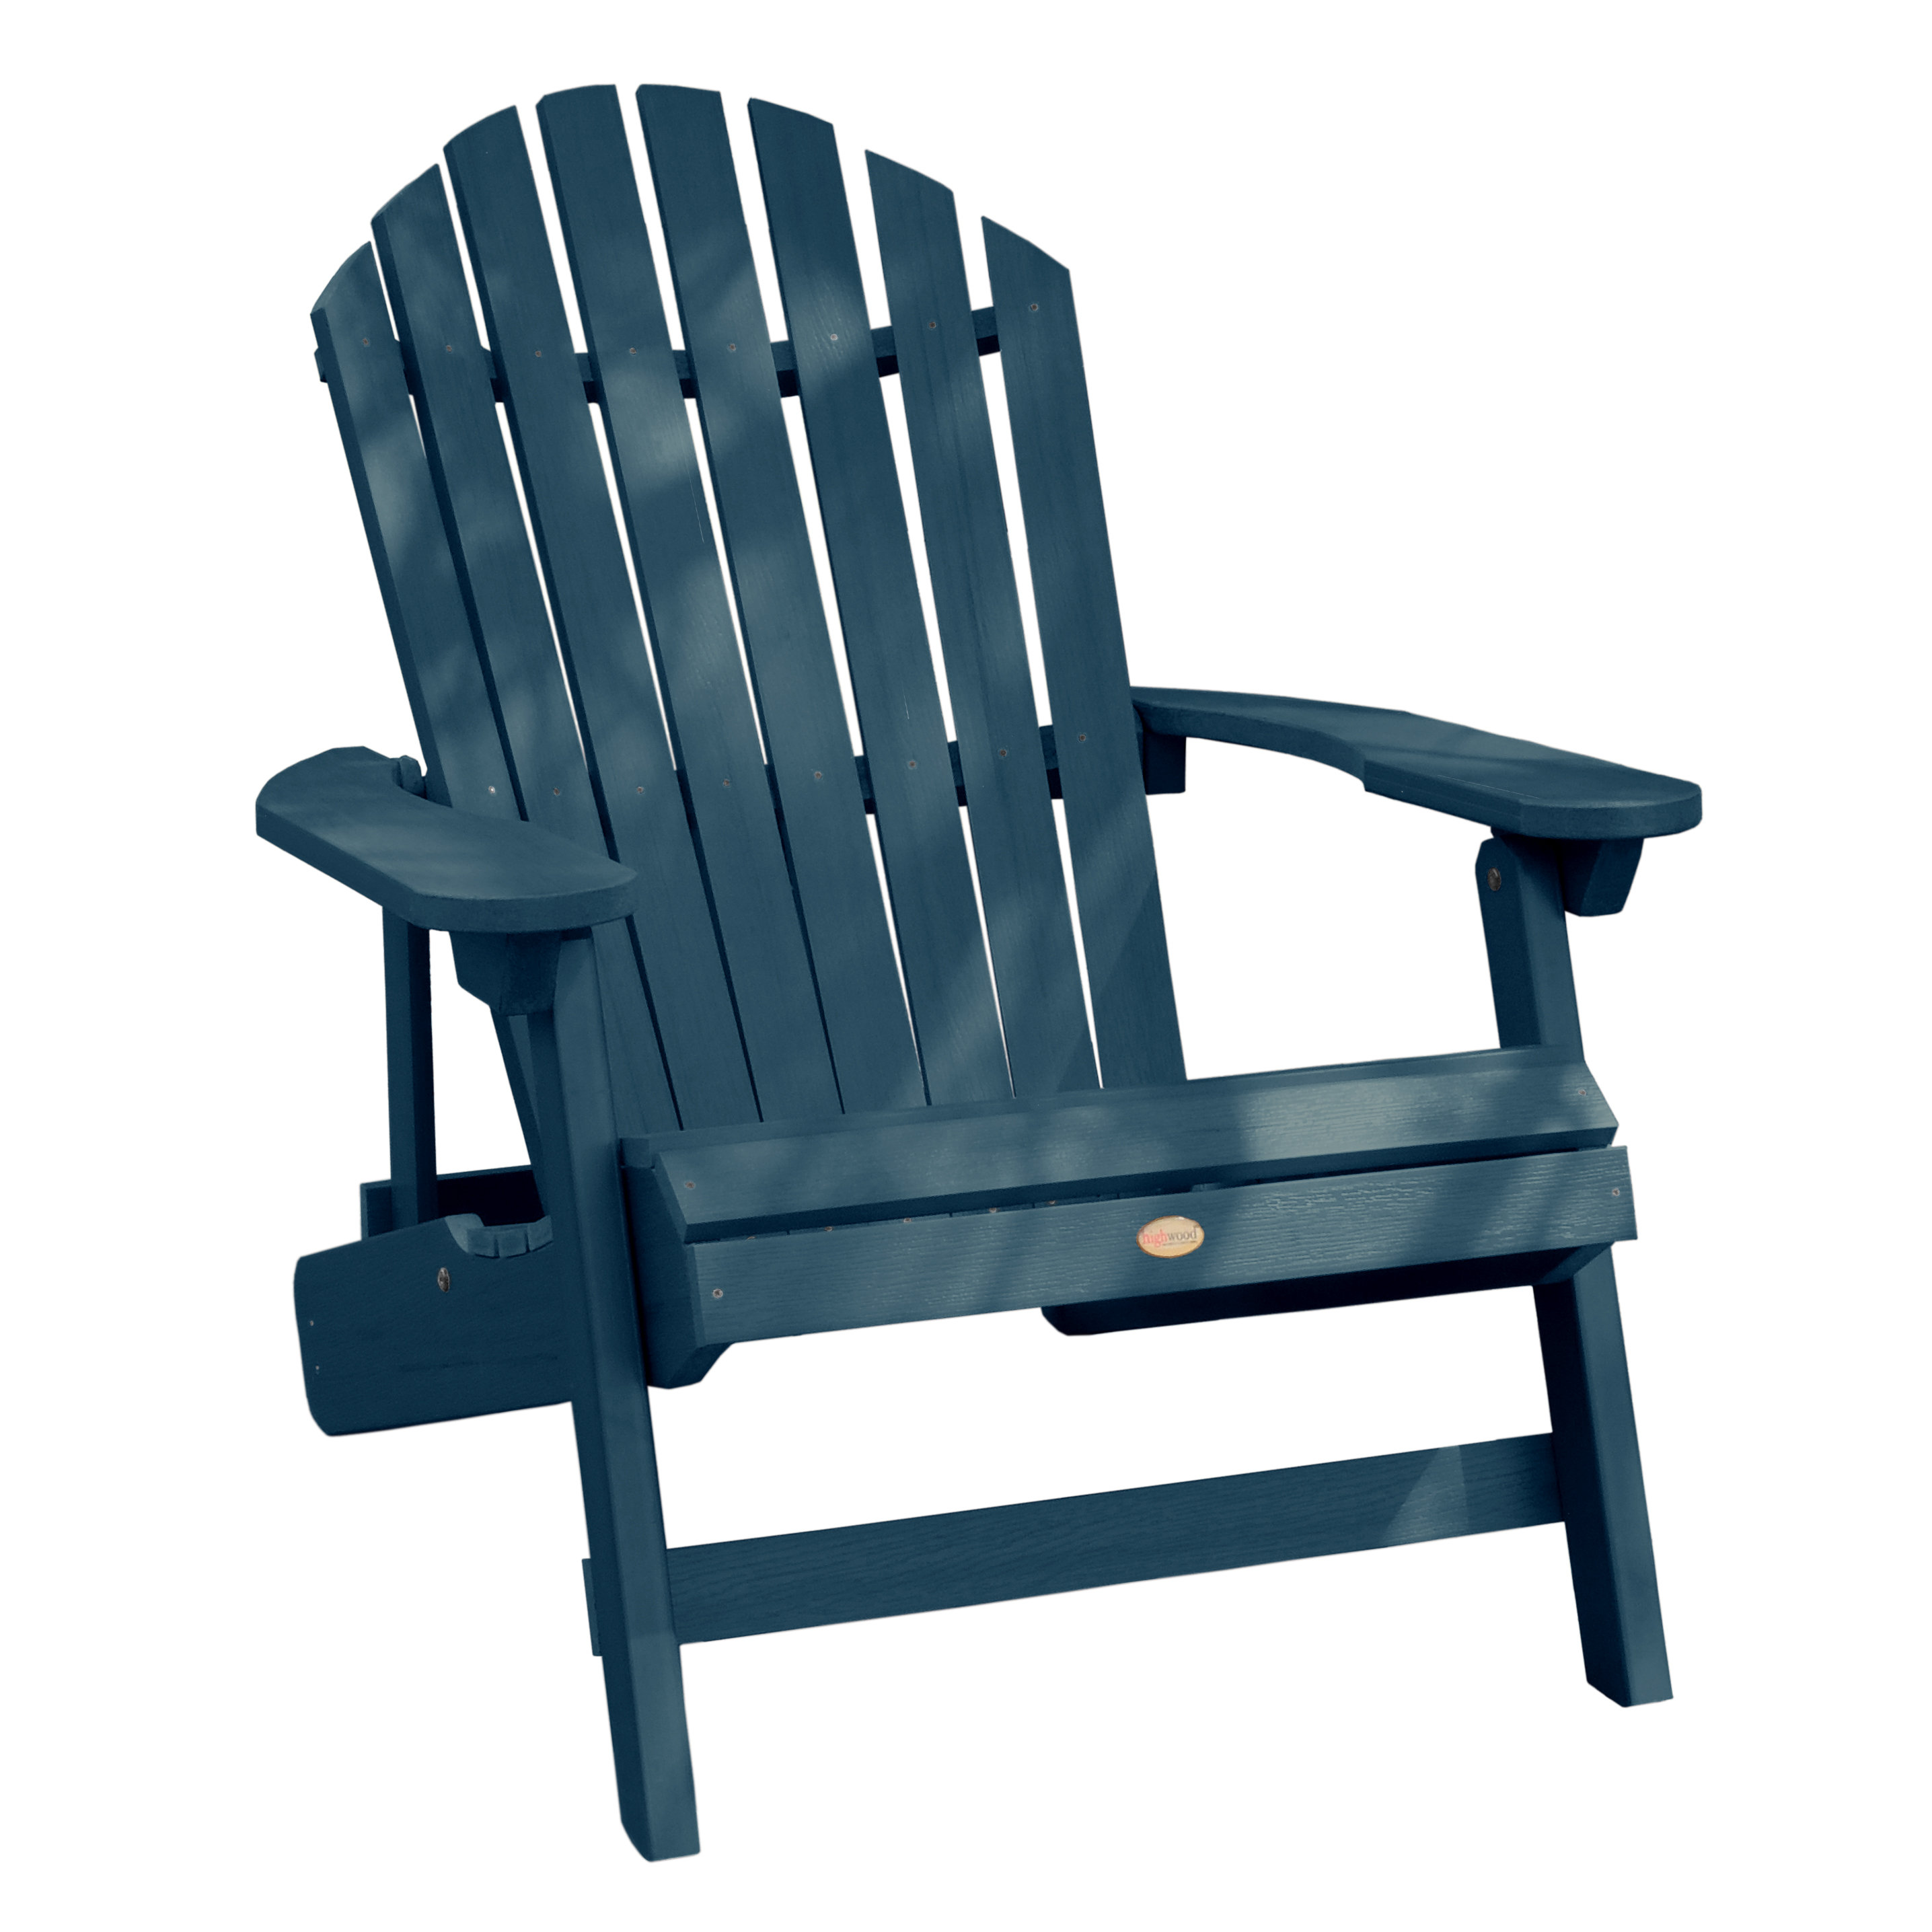 Albion Folding And Reclining Adirondack Chair SEHO5579 